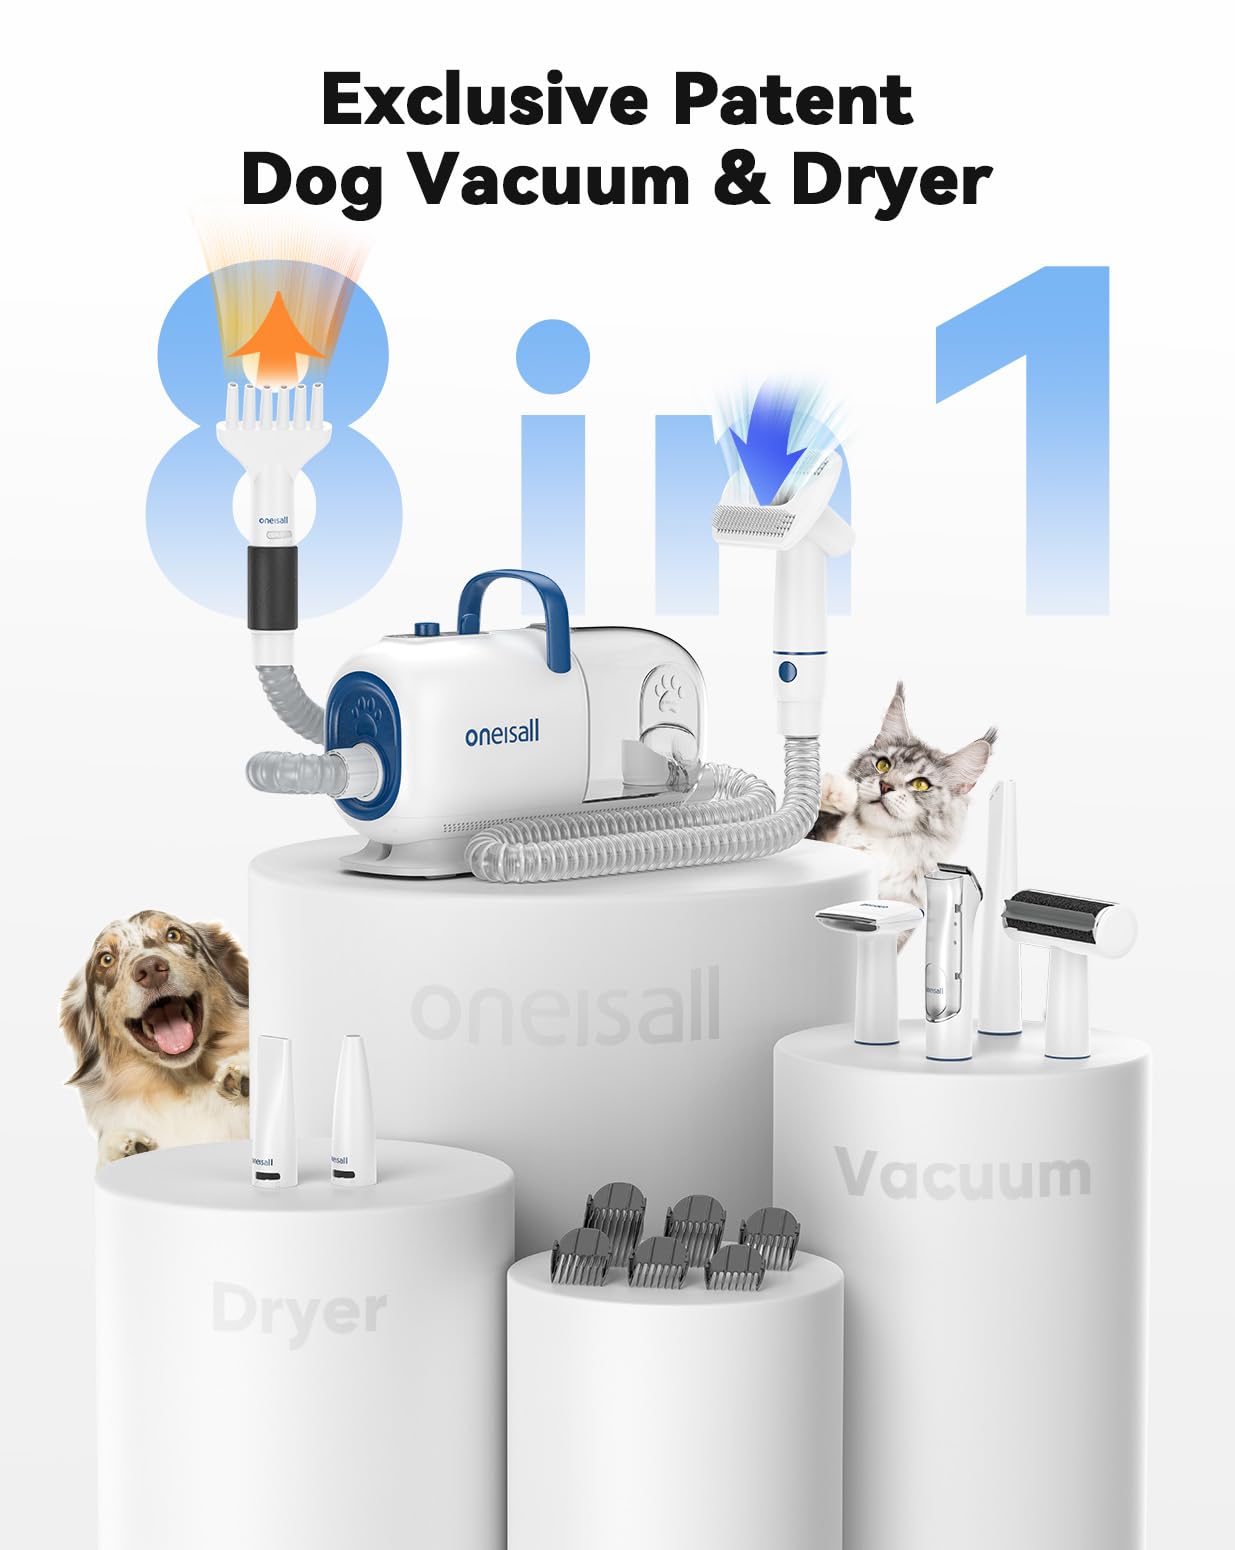 Dog Vacuum & Dryer for Shedding Grooming, 8 in 1 Dog Grooming Kit